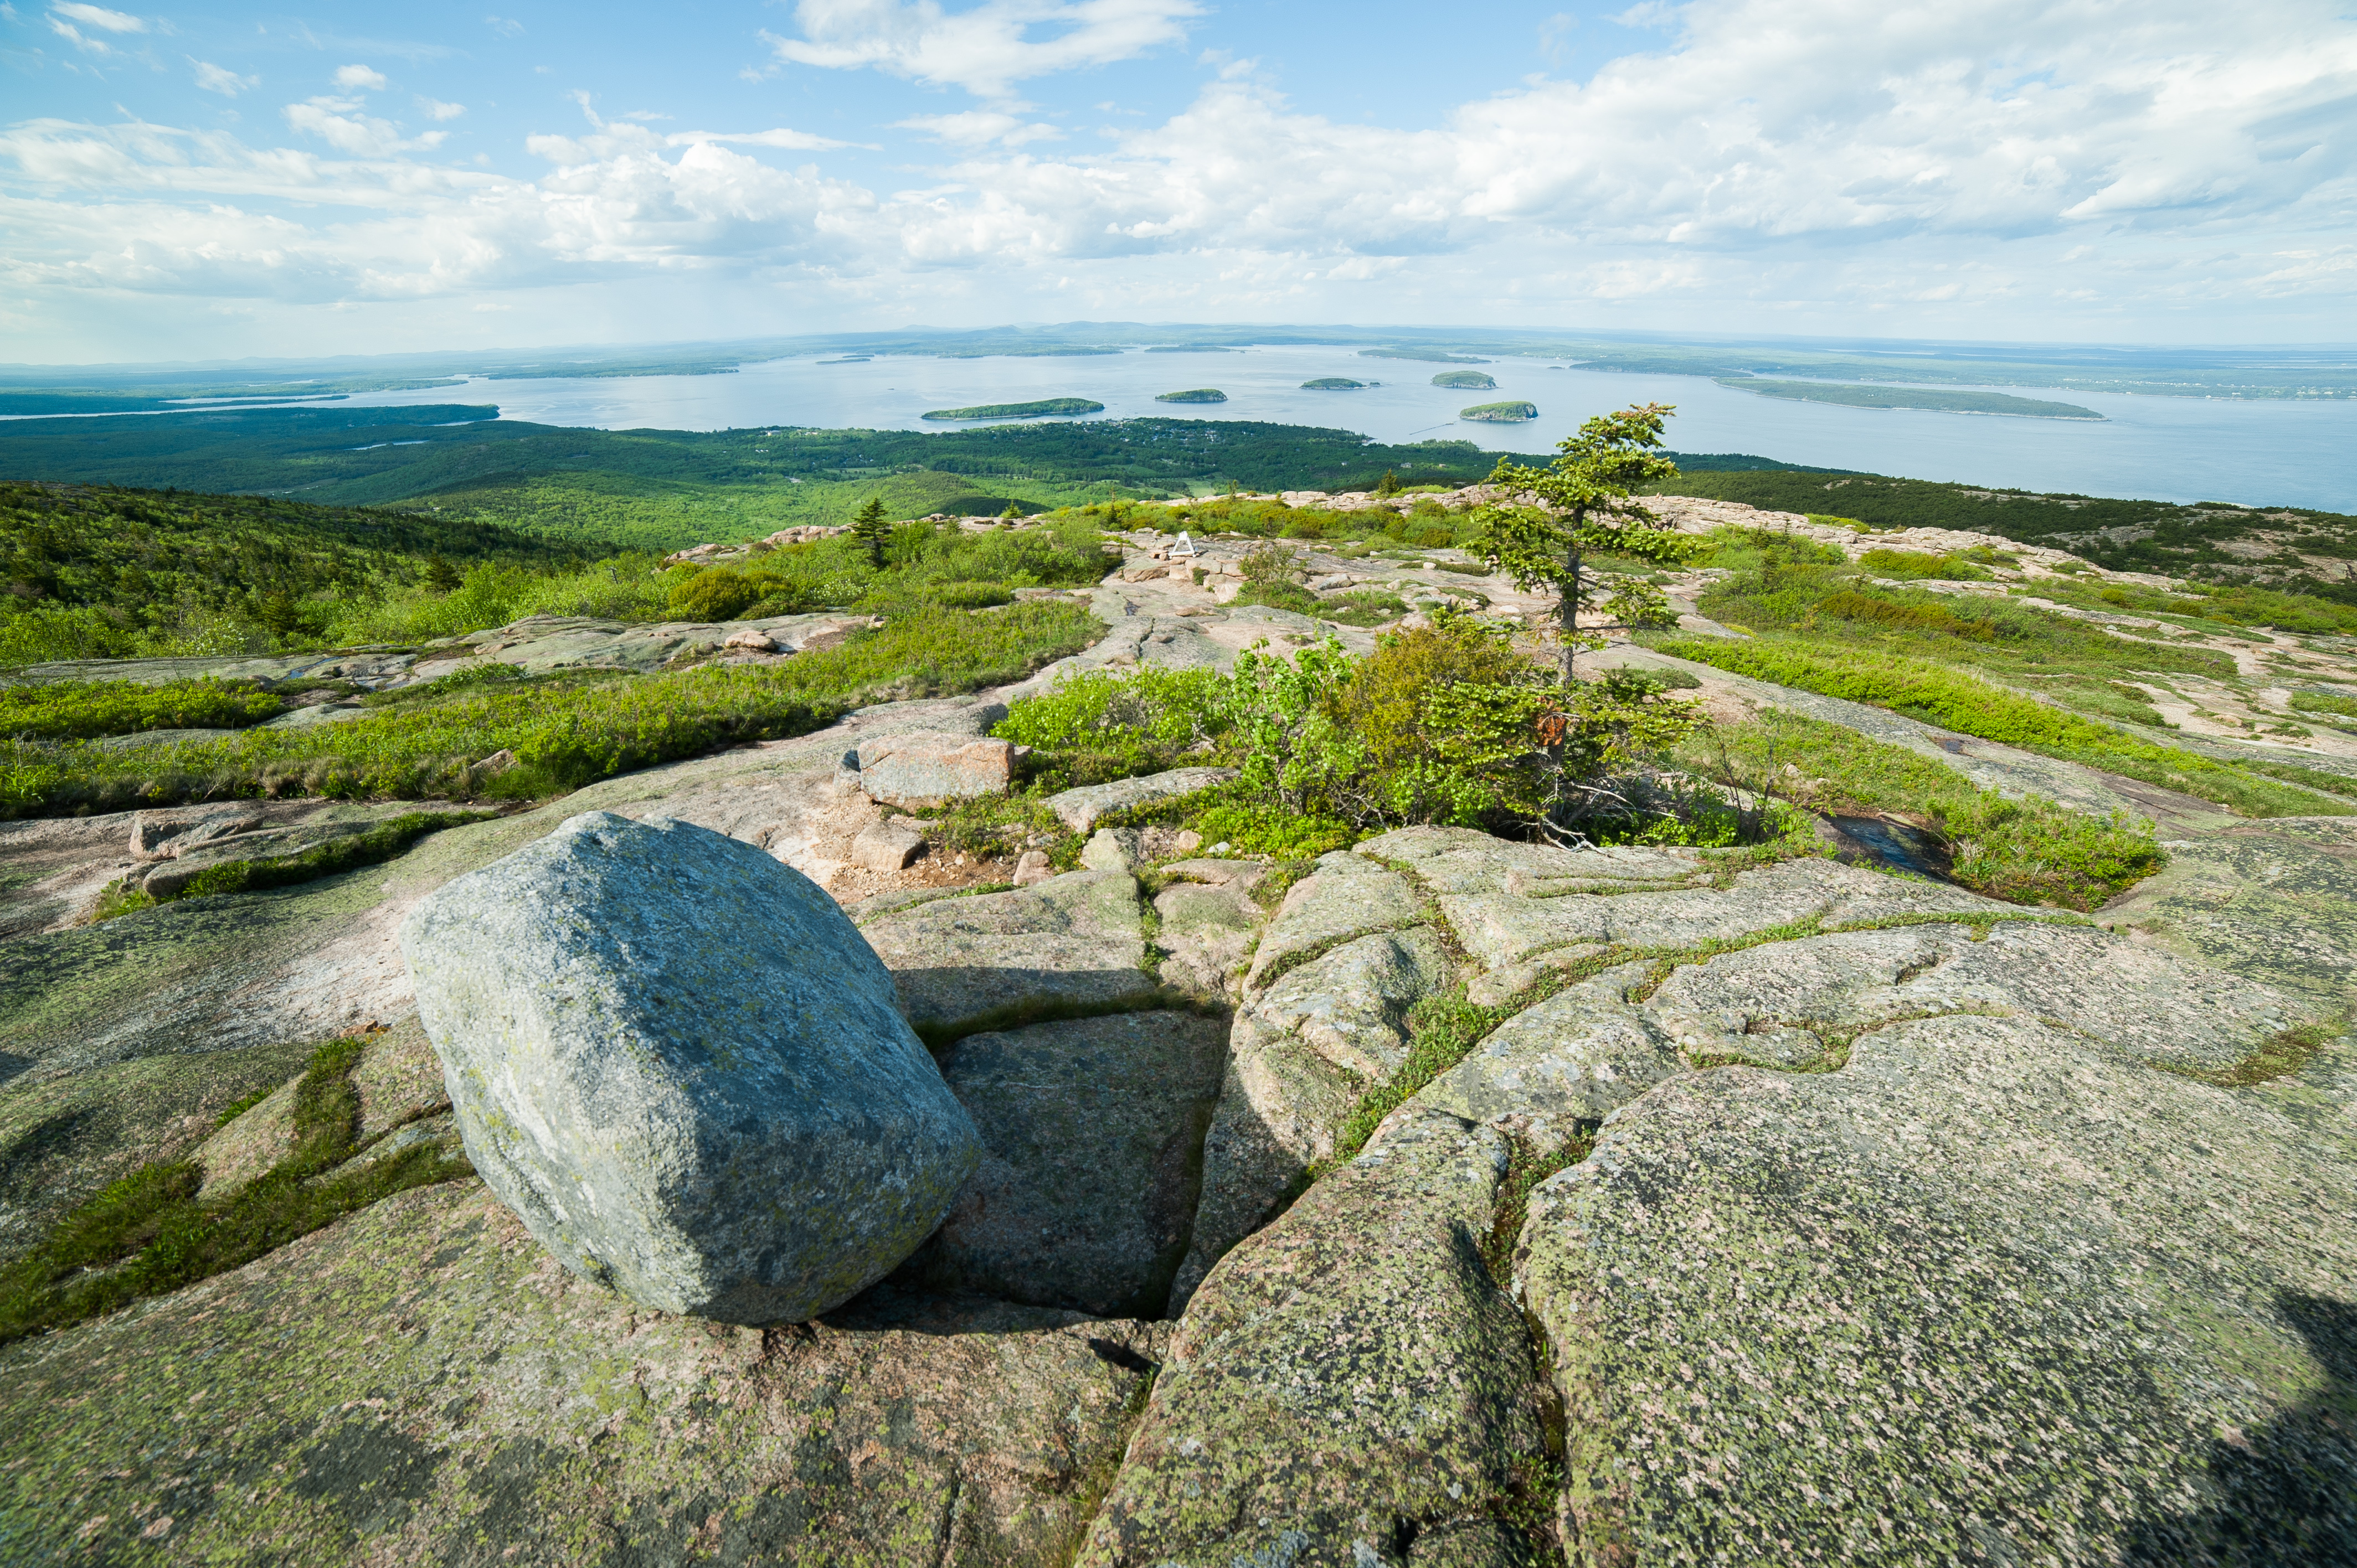 A view from a mountain summit with islands and a bay in the background